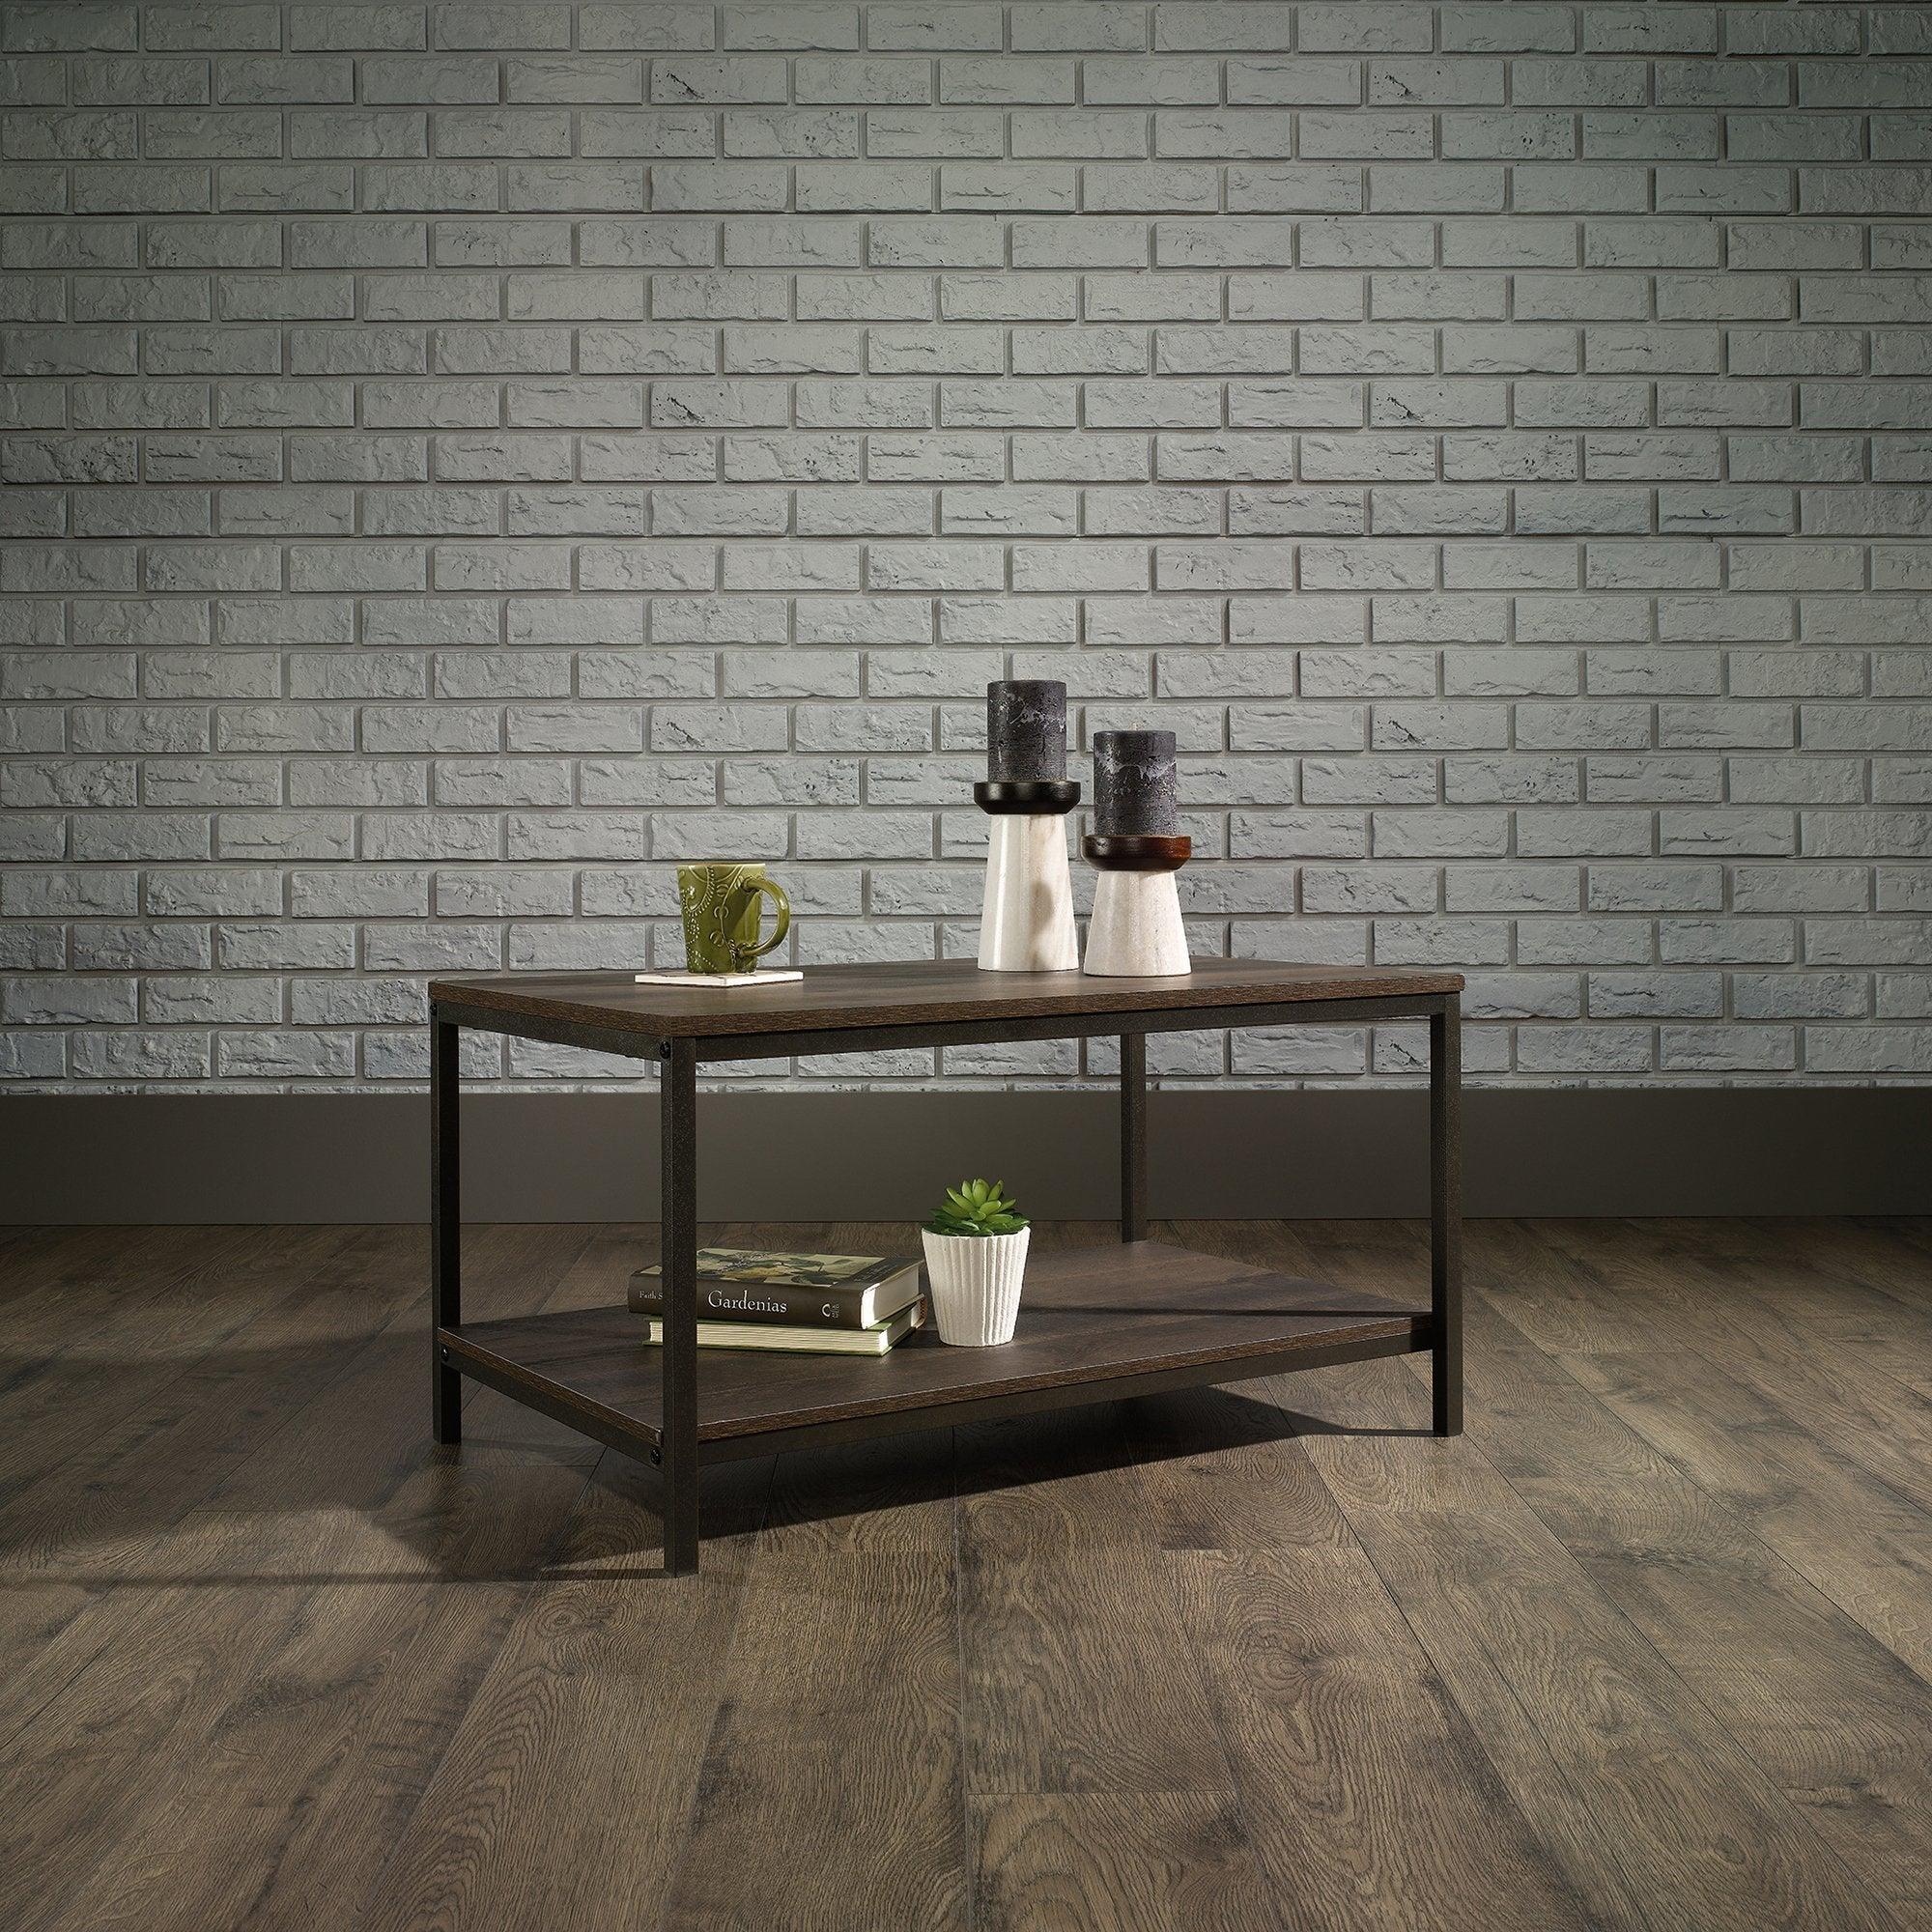 Industrial style coffee table smoked oak - crimblefest furniture - image 1